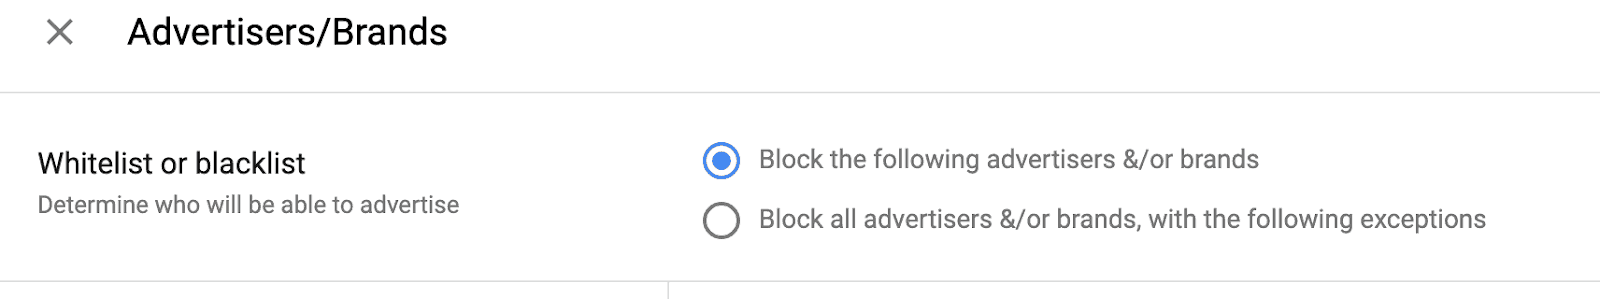 blocking advertisers and brands